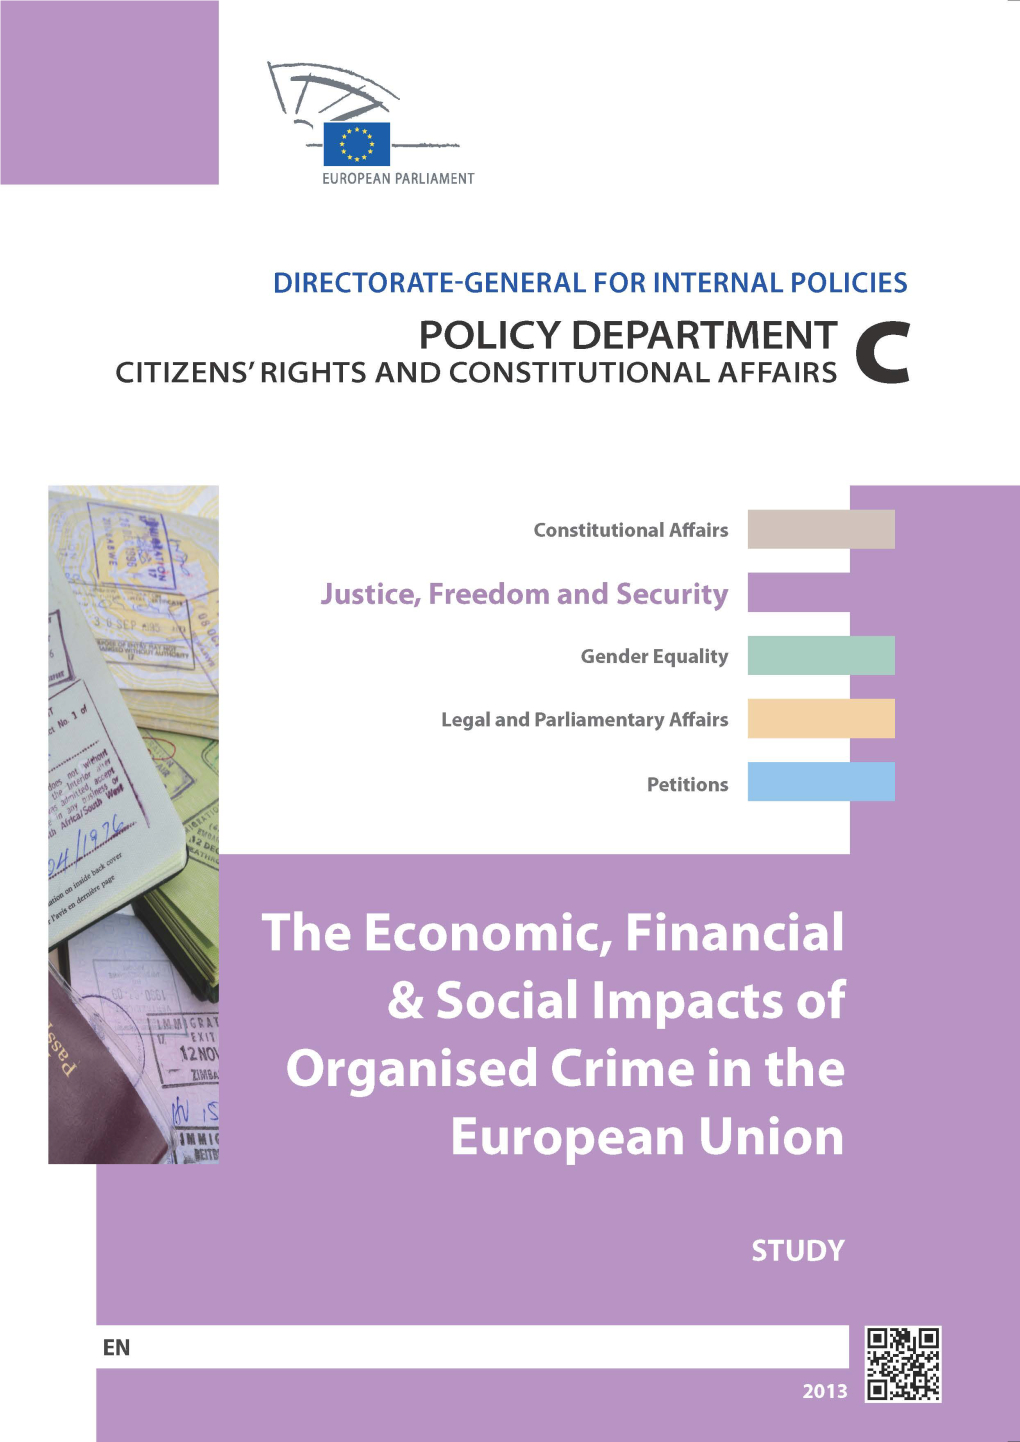 The Economic, Financial & Social Impacts of Organised Crime in the EU